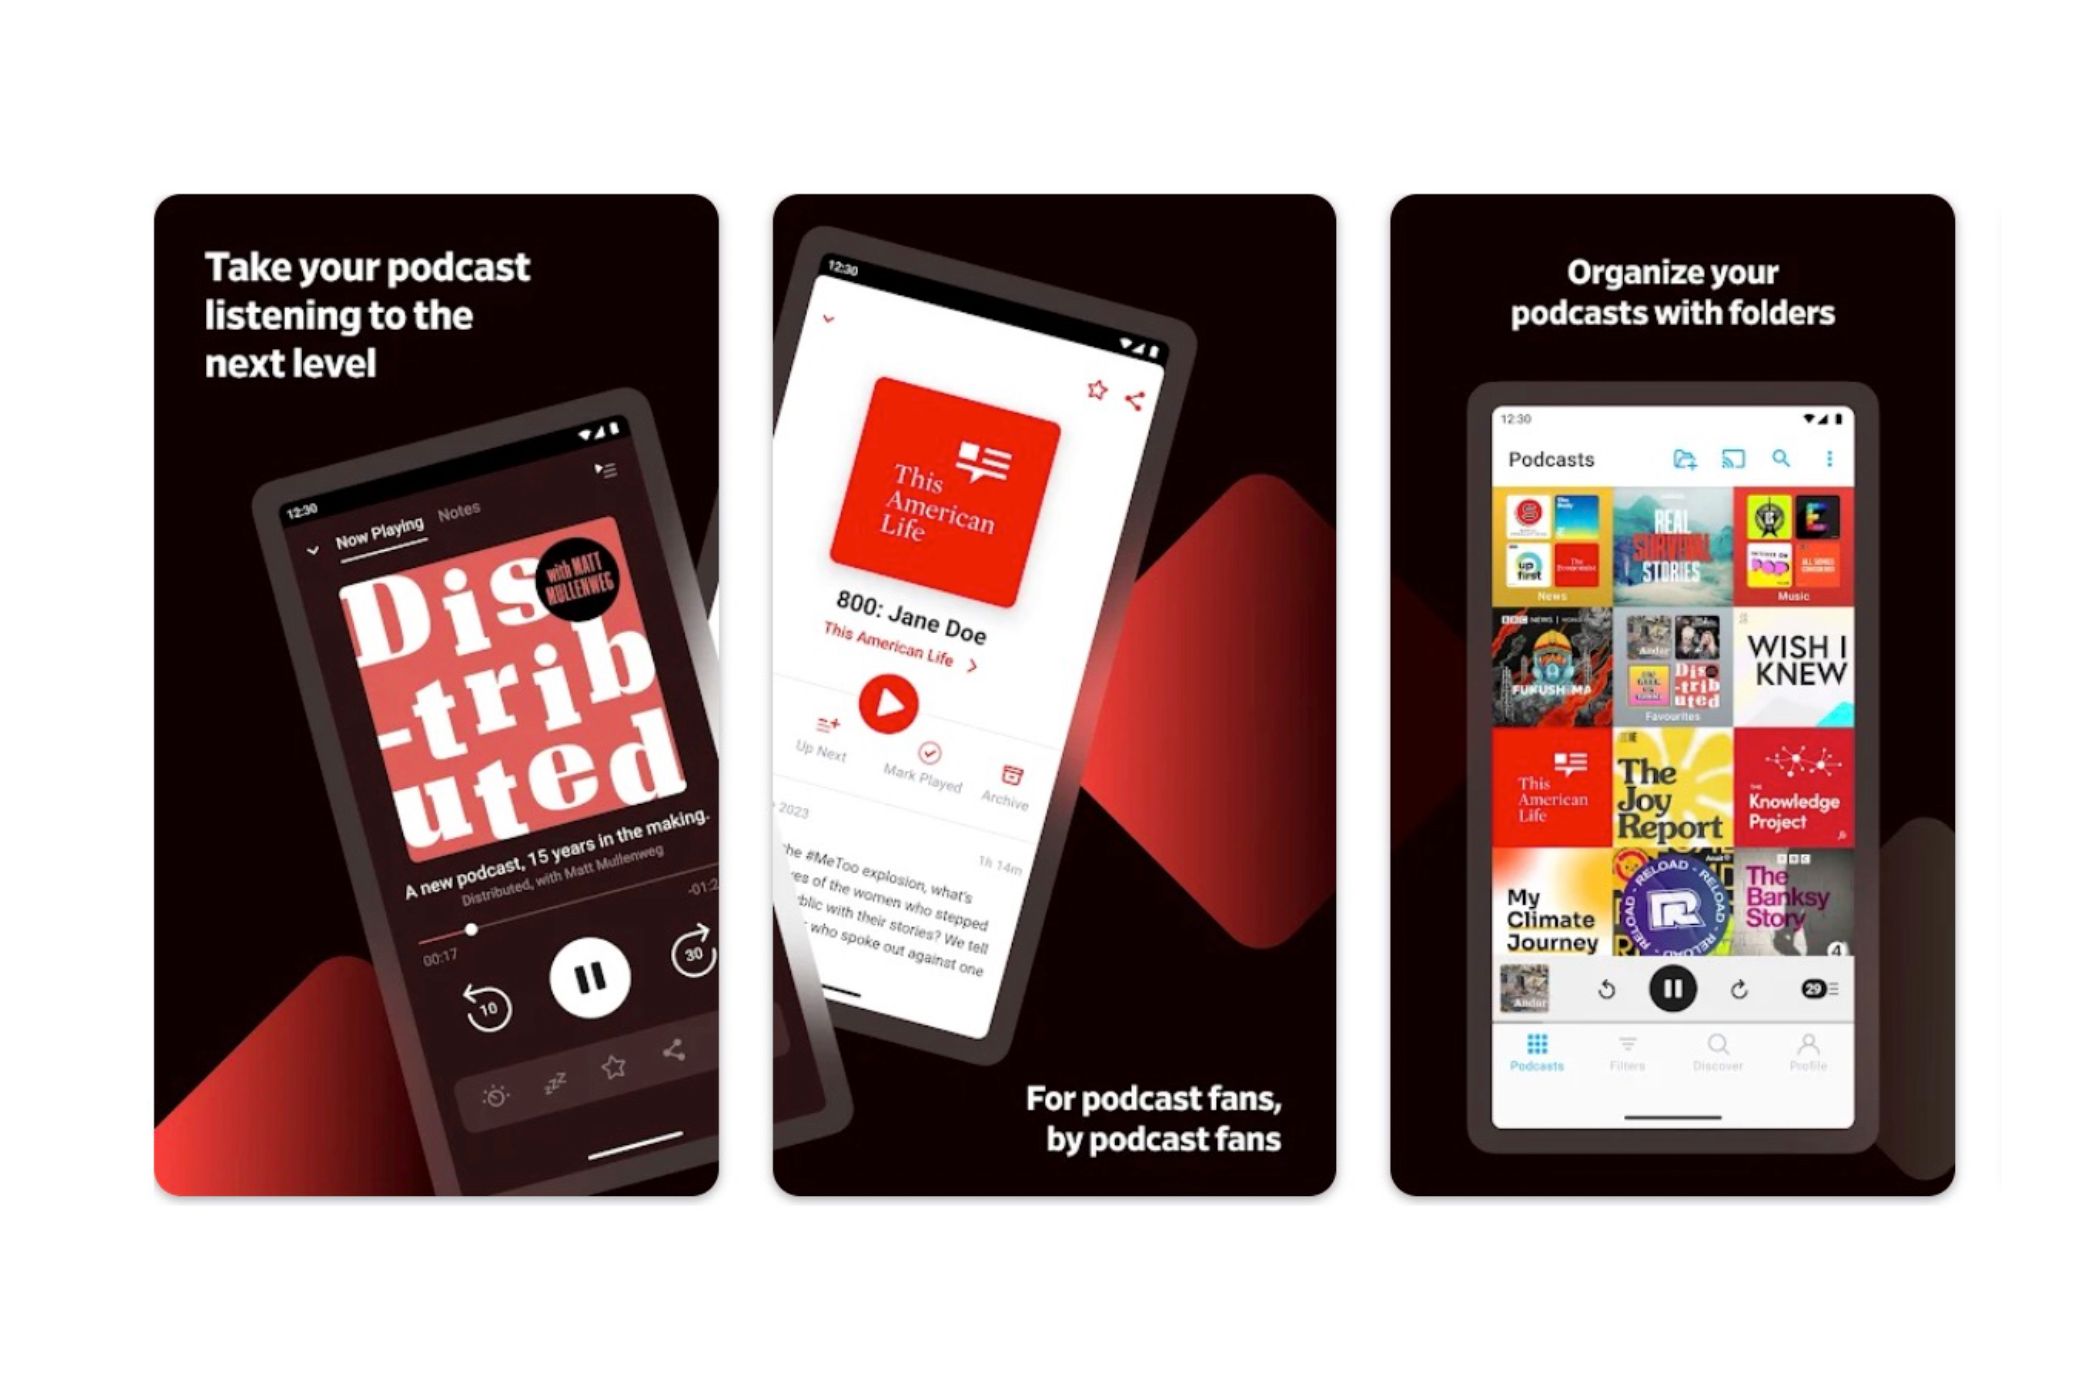 Pocket Casts features shown in screenshots. 